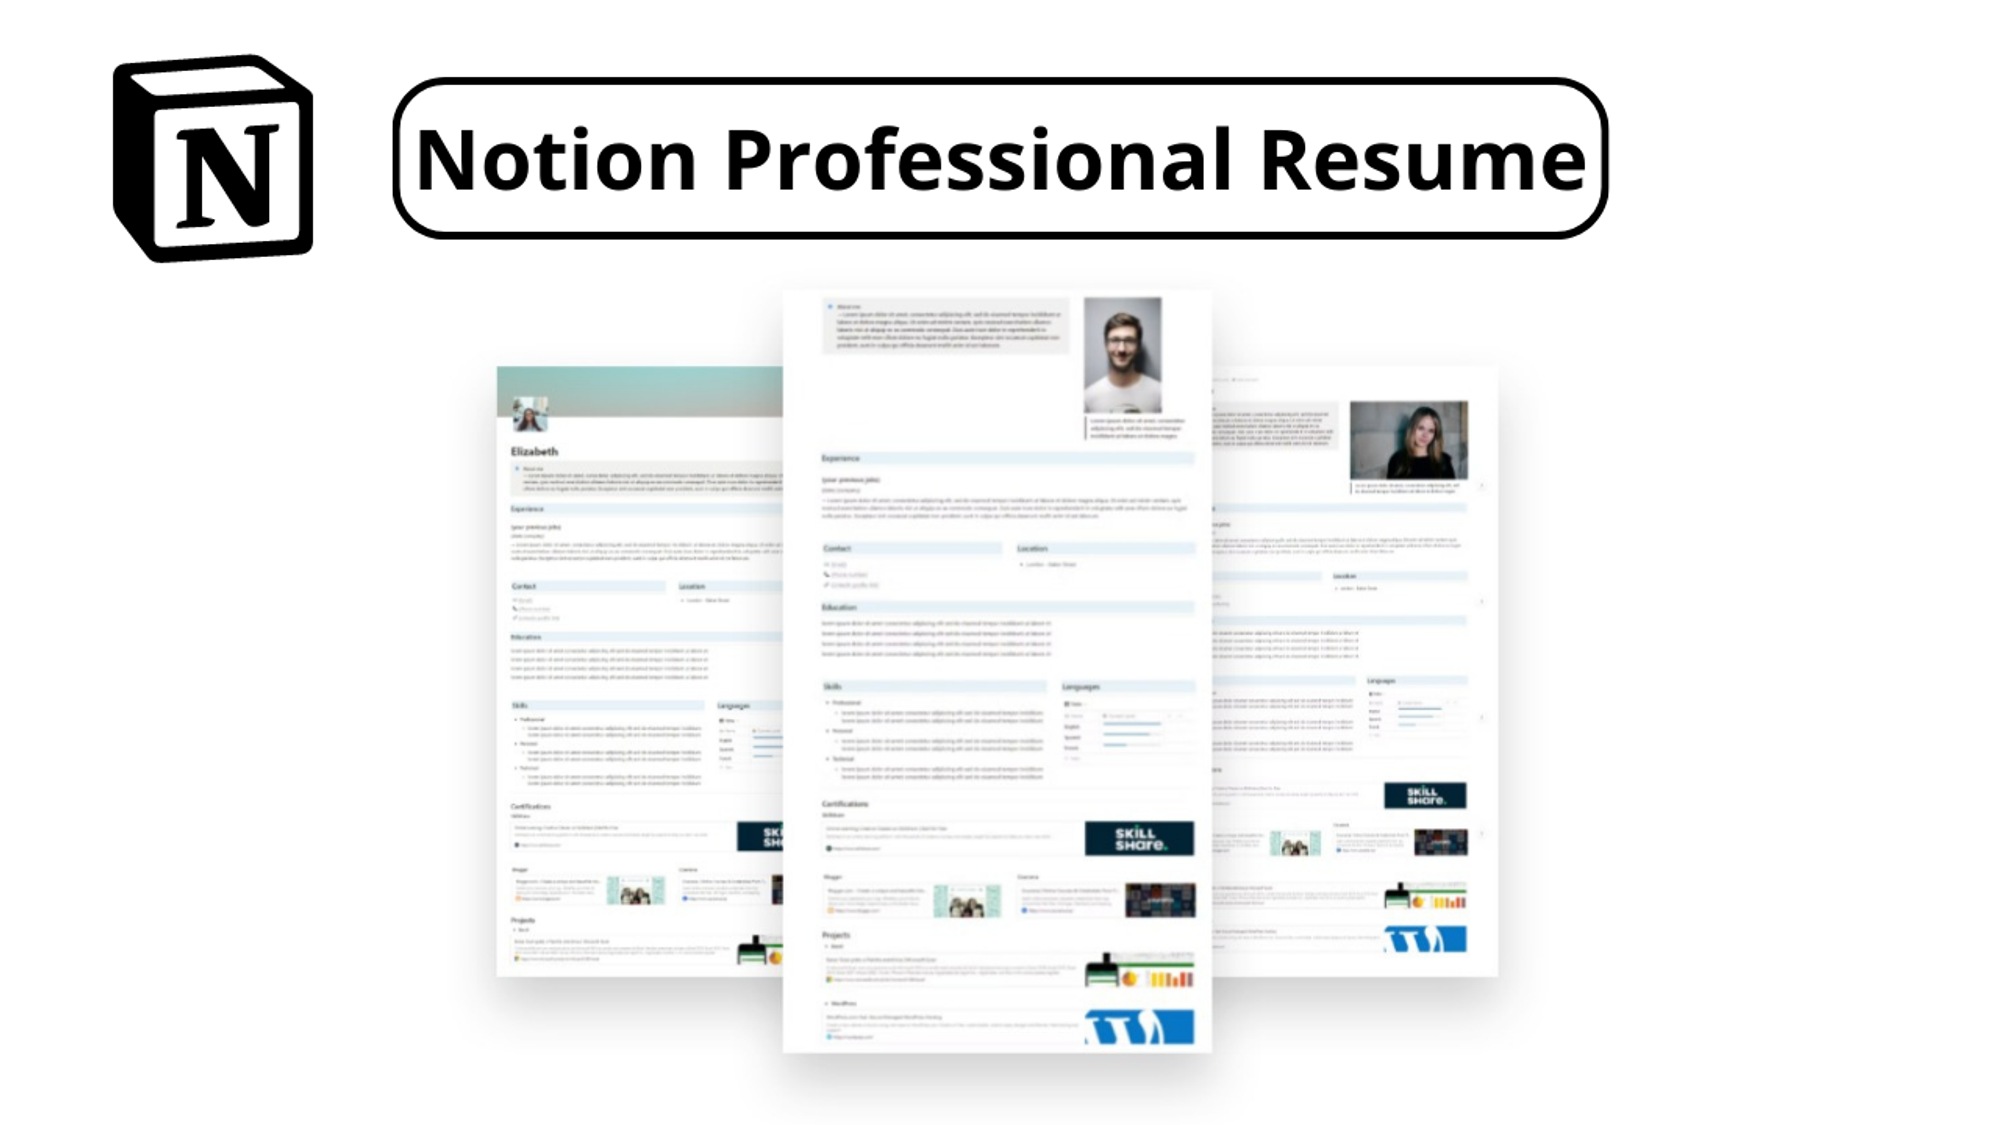 Notion Professional Resume (1).png